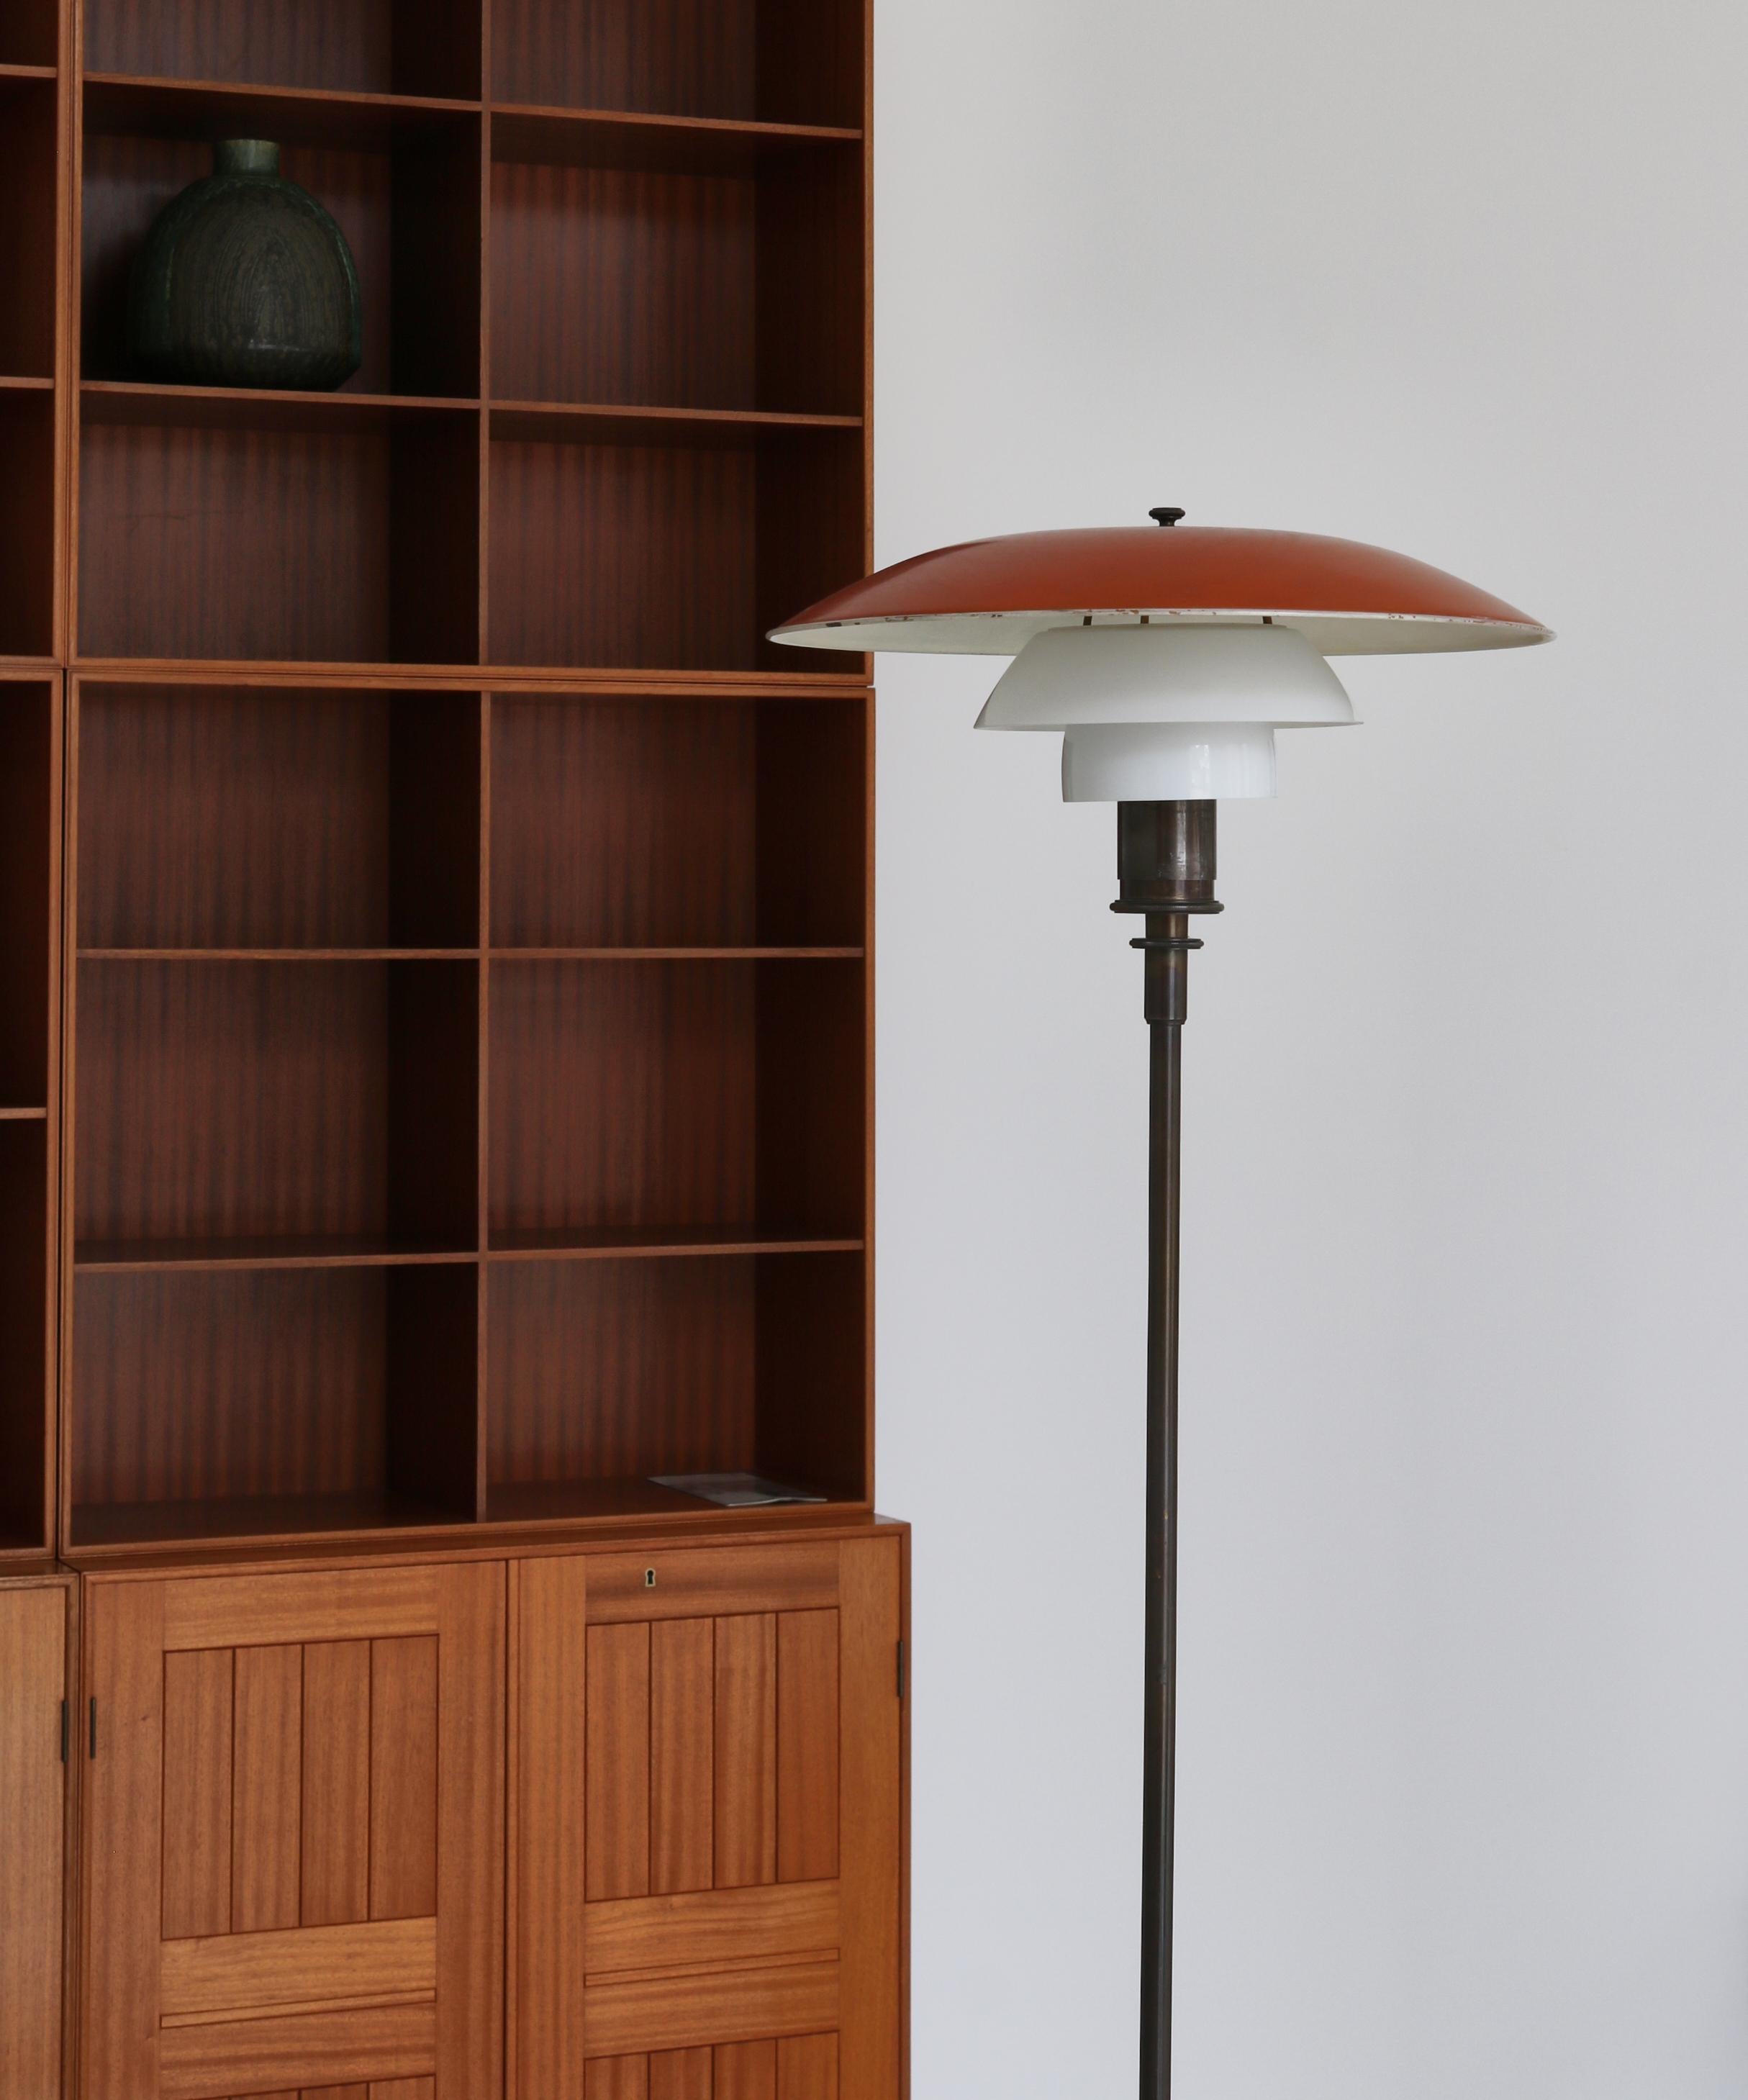 Early and important floor PH-lamp 4/3 by Poul Henningsen (PH) manufactured at Louis Poulsen, Copenhagen between 1926-28. The lamp base is made from patinated bronze and the top shade is red and white lacquered bronze. Middle and lower screen are